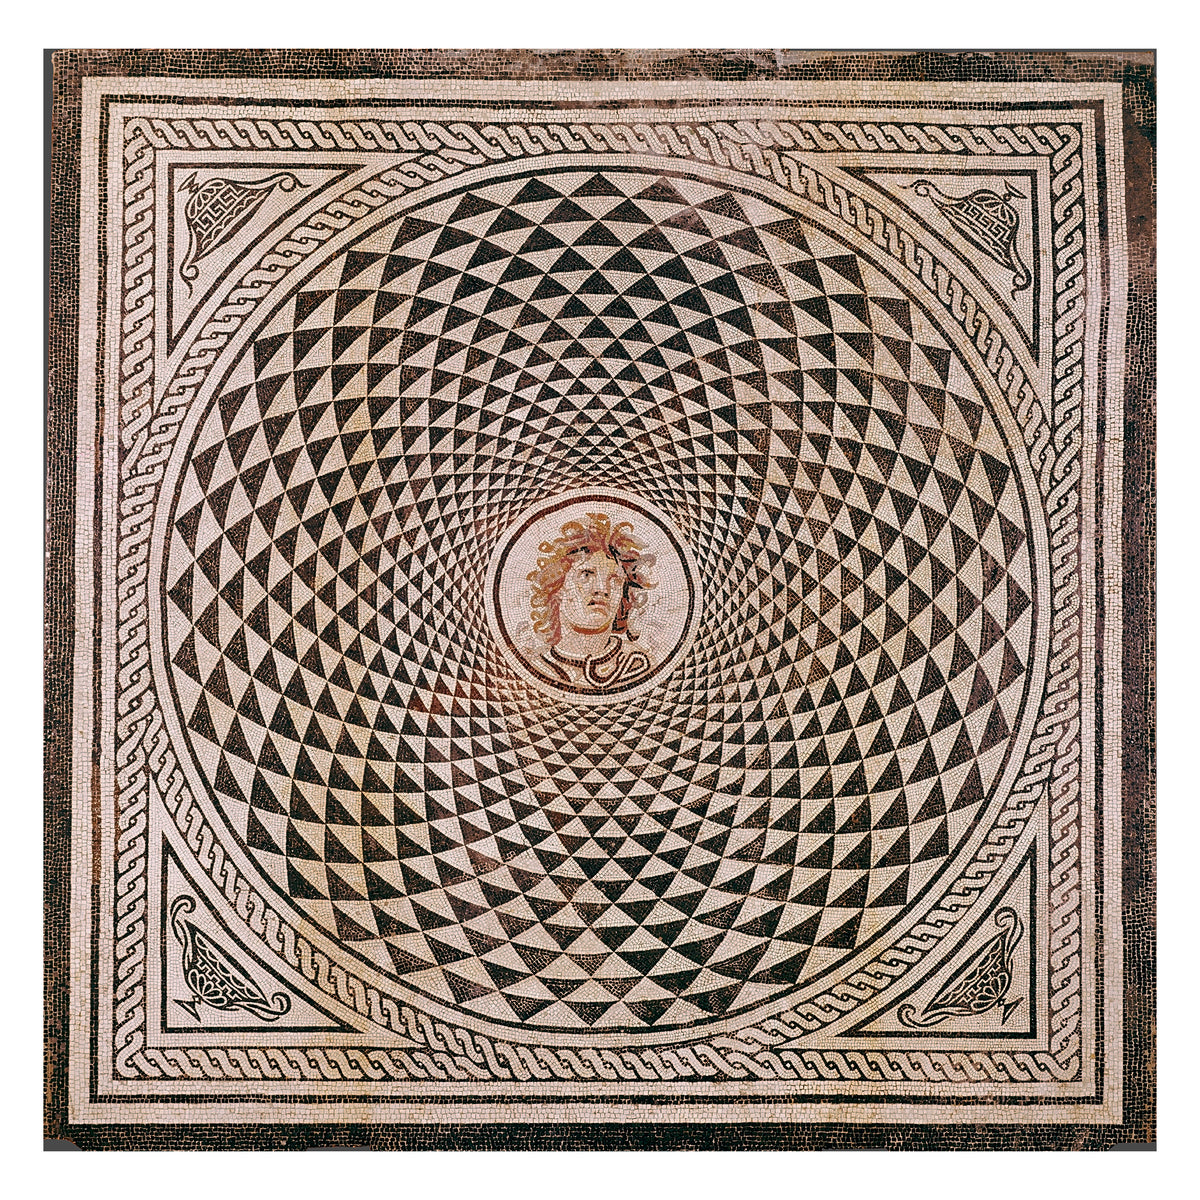 Getty Villa Mosaic Mind Bender Puzzle-Medusa Mosaic inspiration for puzzle | Getty Store